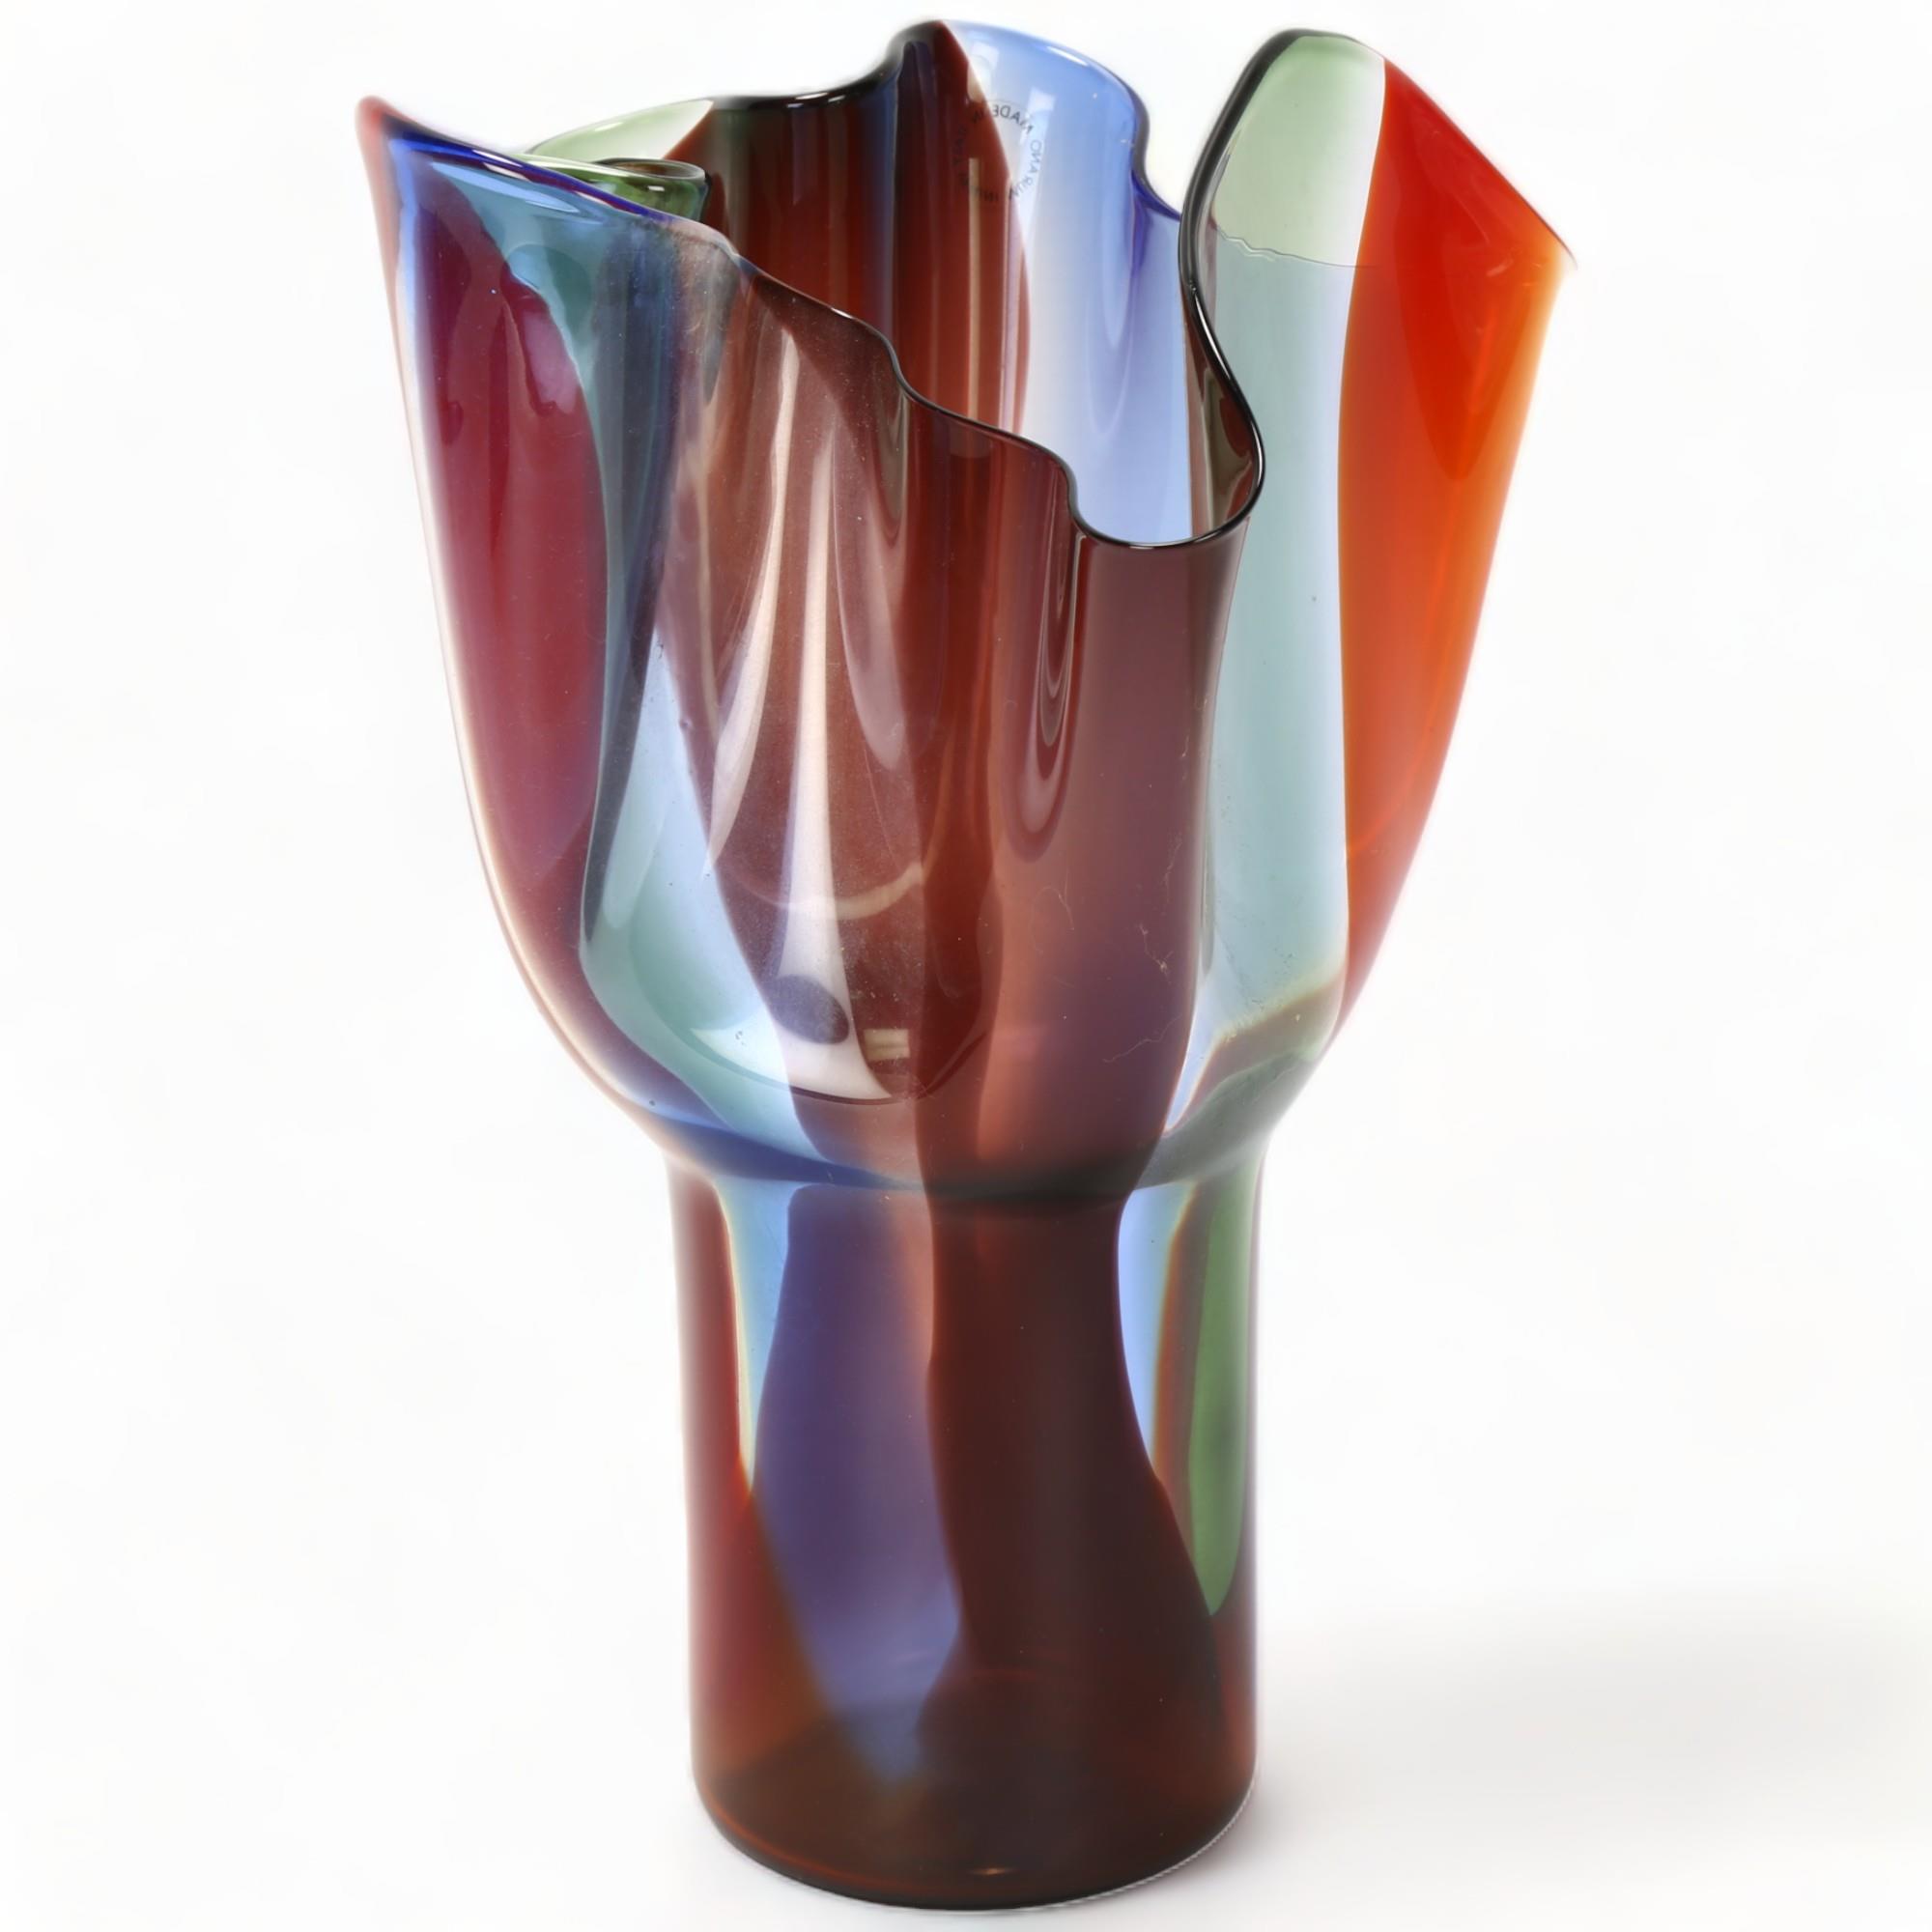 TIMO SARPANEVA for Venini, a 1991 designed Kukinto vase in blue, red, green and violet glass, signed